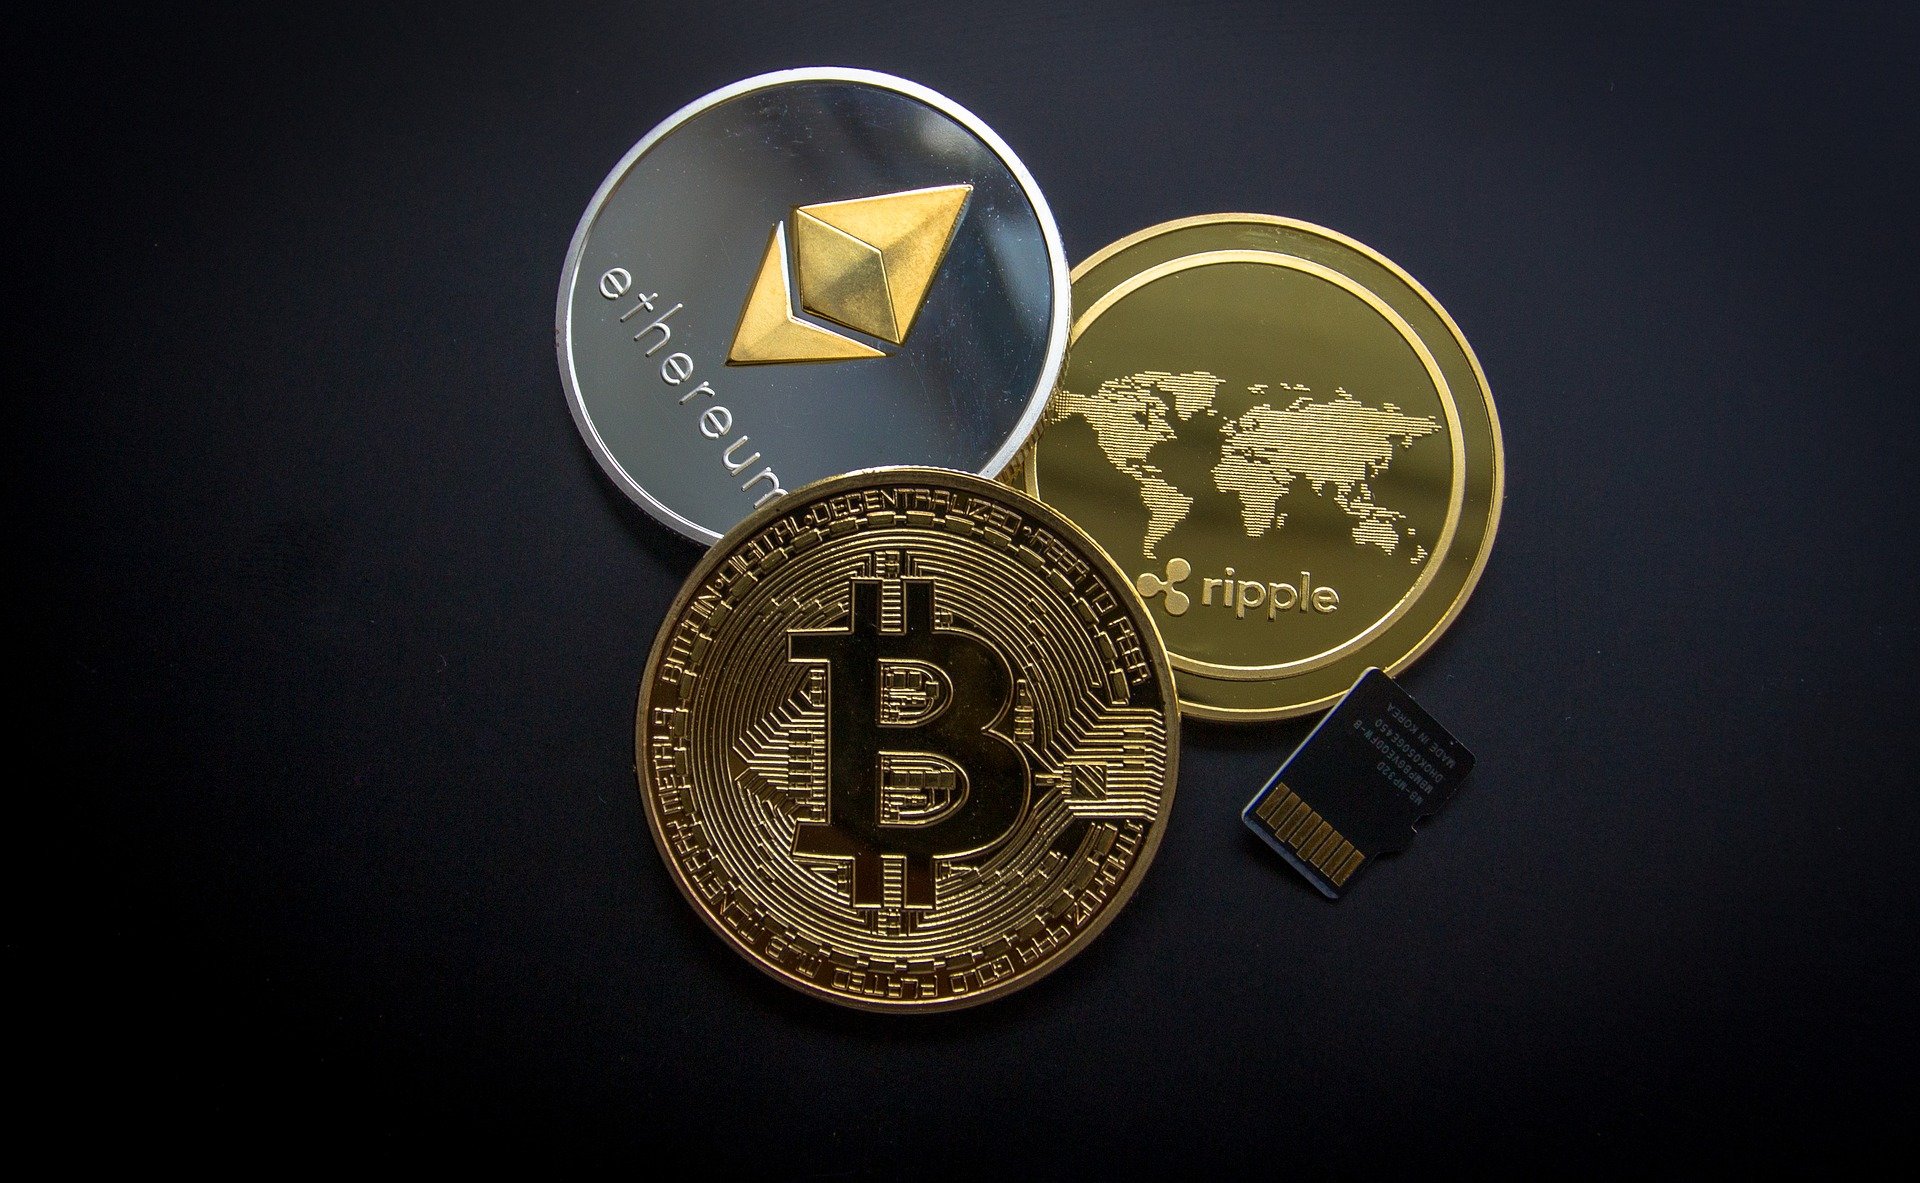 The Risks of Cryptocurrencies: Lack of Intrinsic Value, Volatility, Fraud, and Cyber Attacks